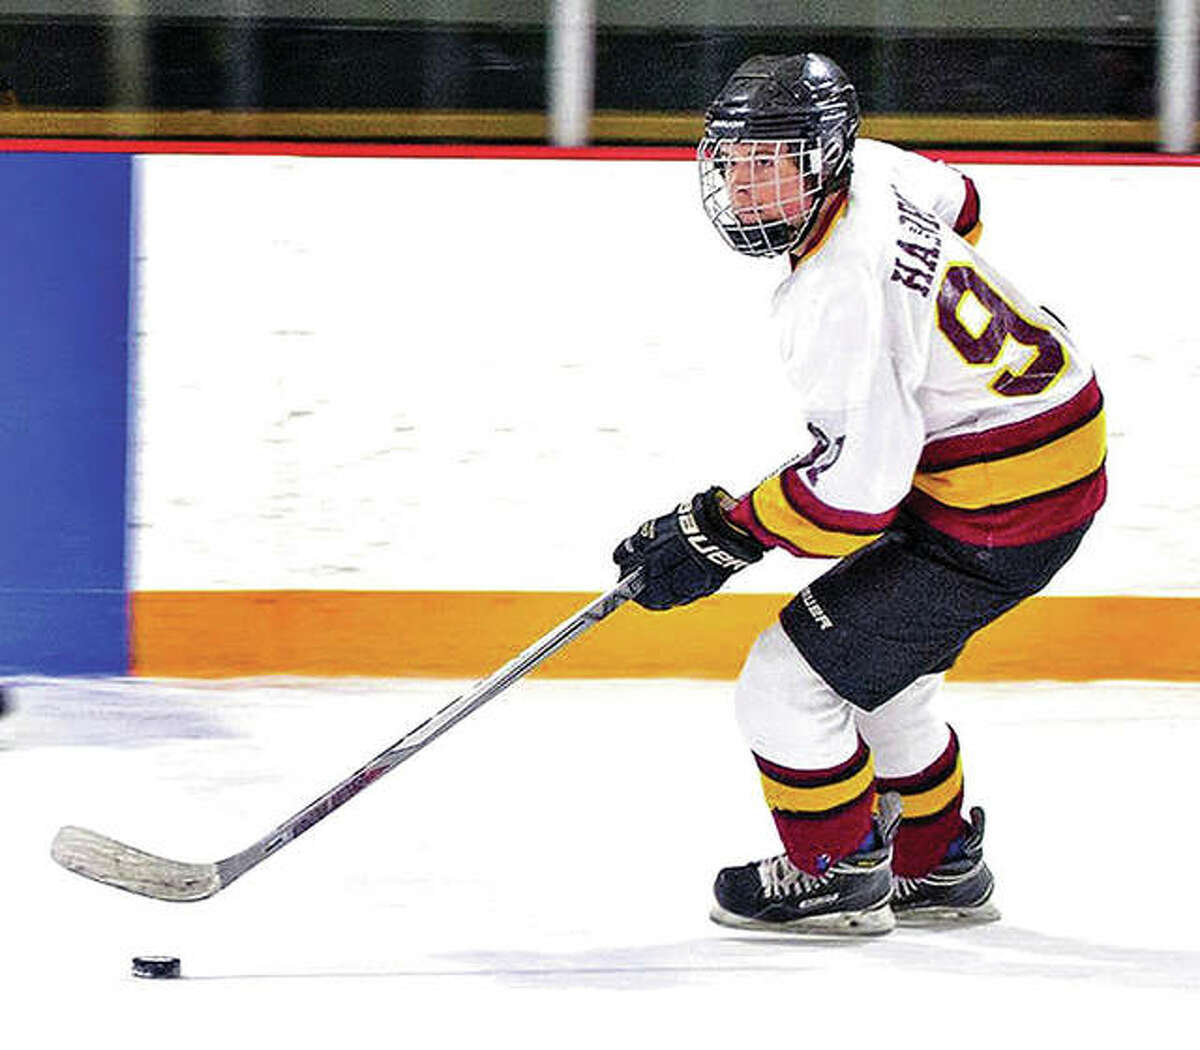 EA-WR’s Kaleb Harrop will lead his team into a quarterfinal-round series against Triad in the Class 1A MVCHA playoffs, set to begin Wednesday at the east Alton Ice Arena. Harrop led the Oilers with 39 goals in the regular season.